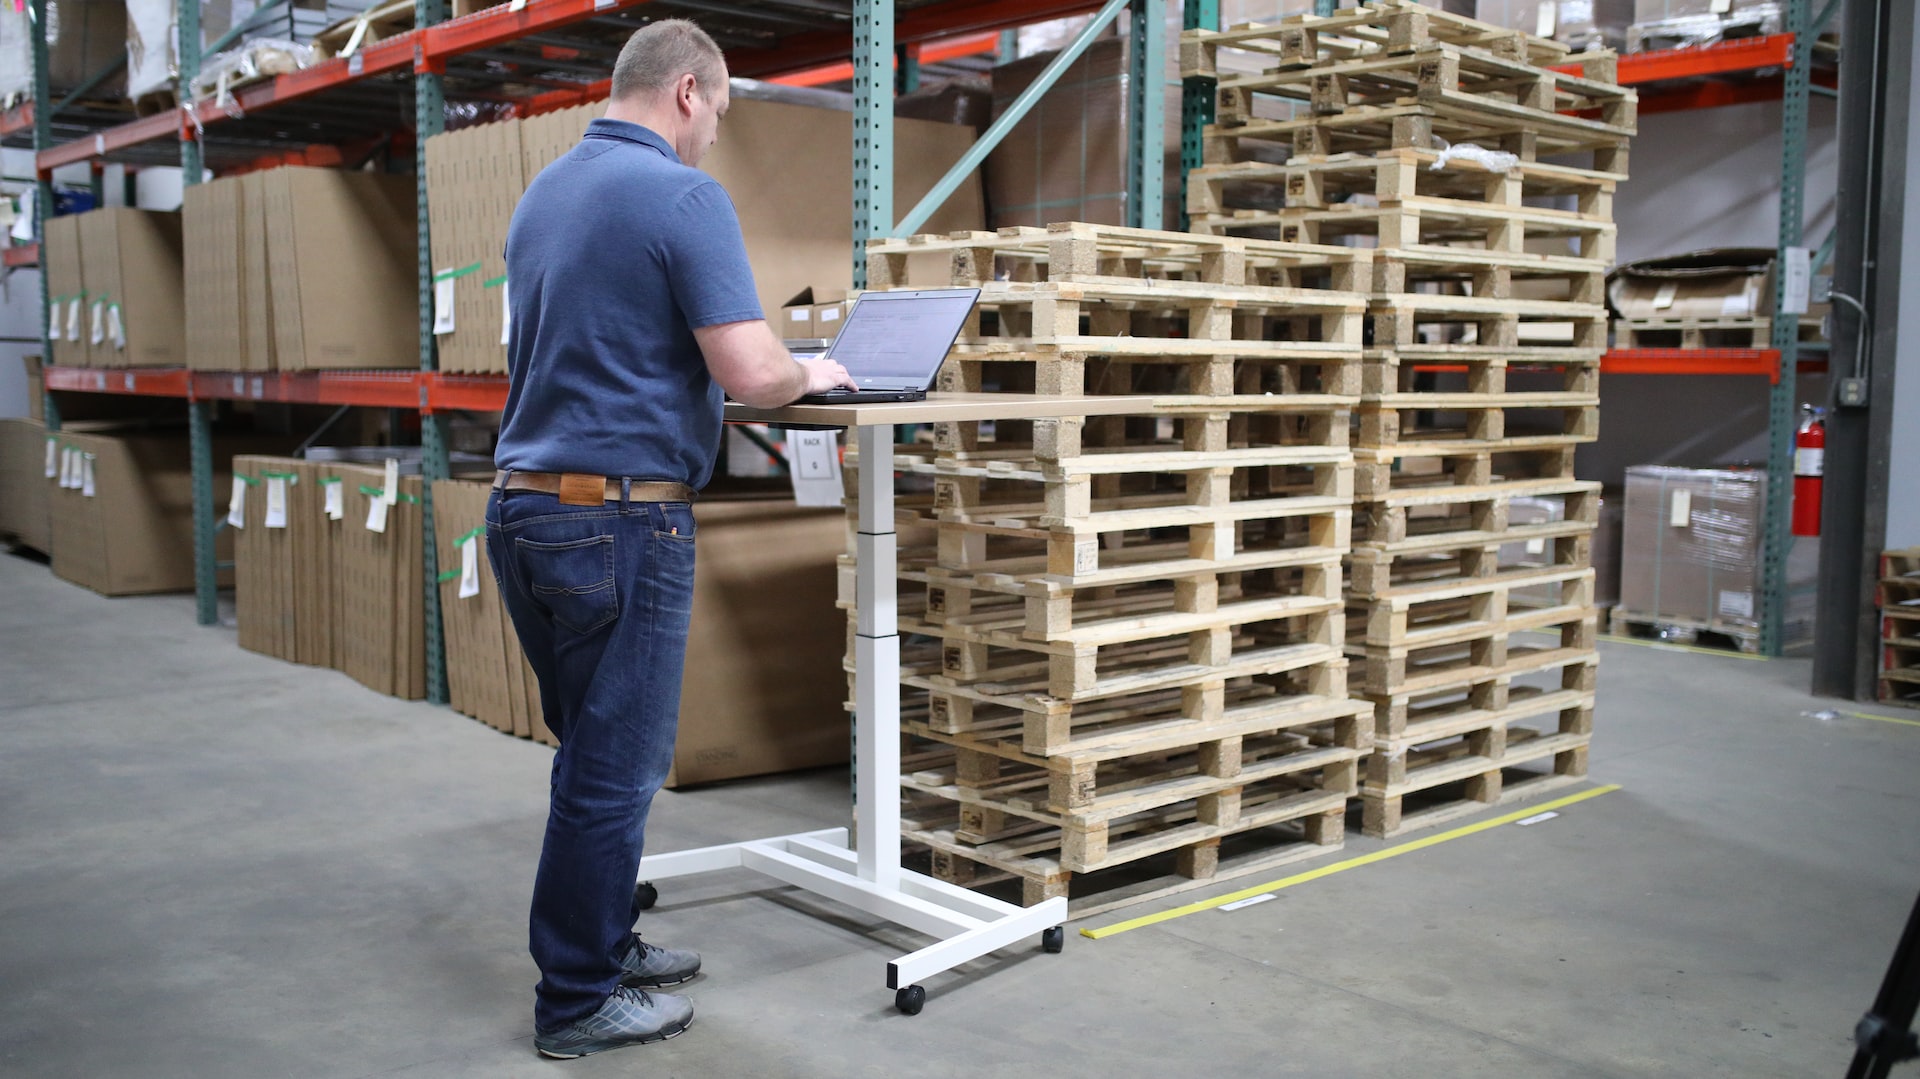 The Ease of Live Warehouse Management System